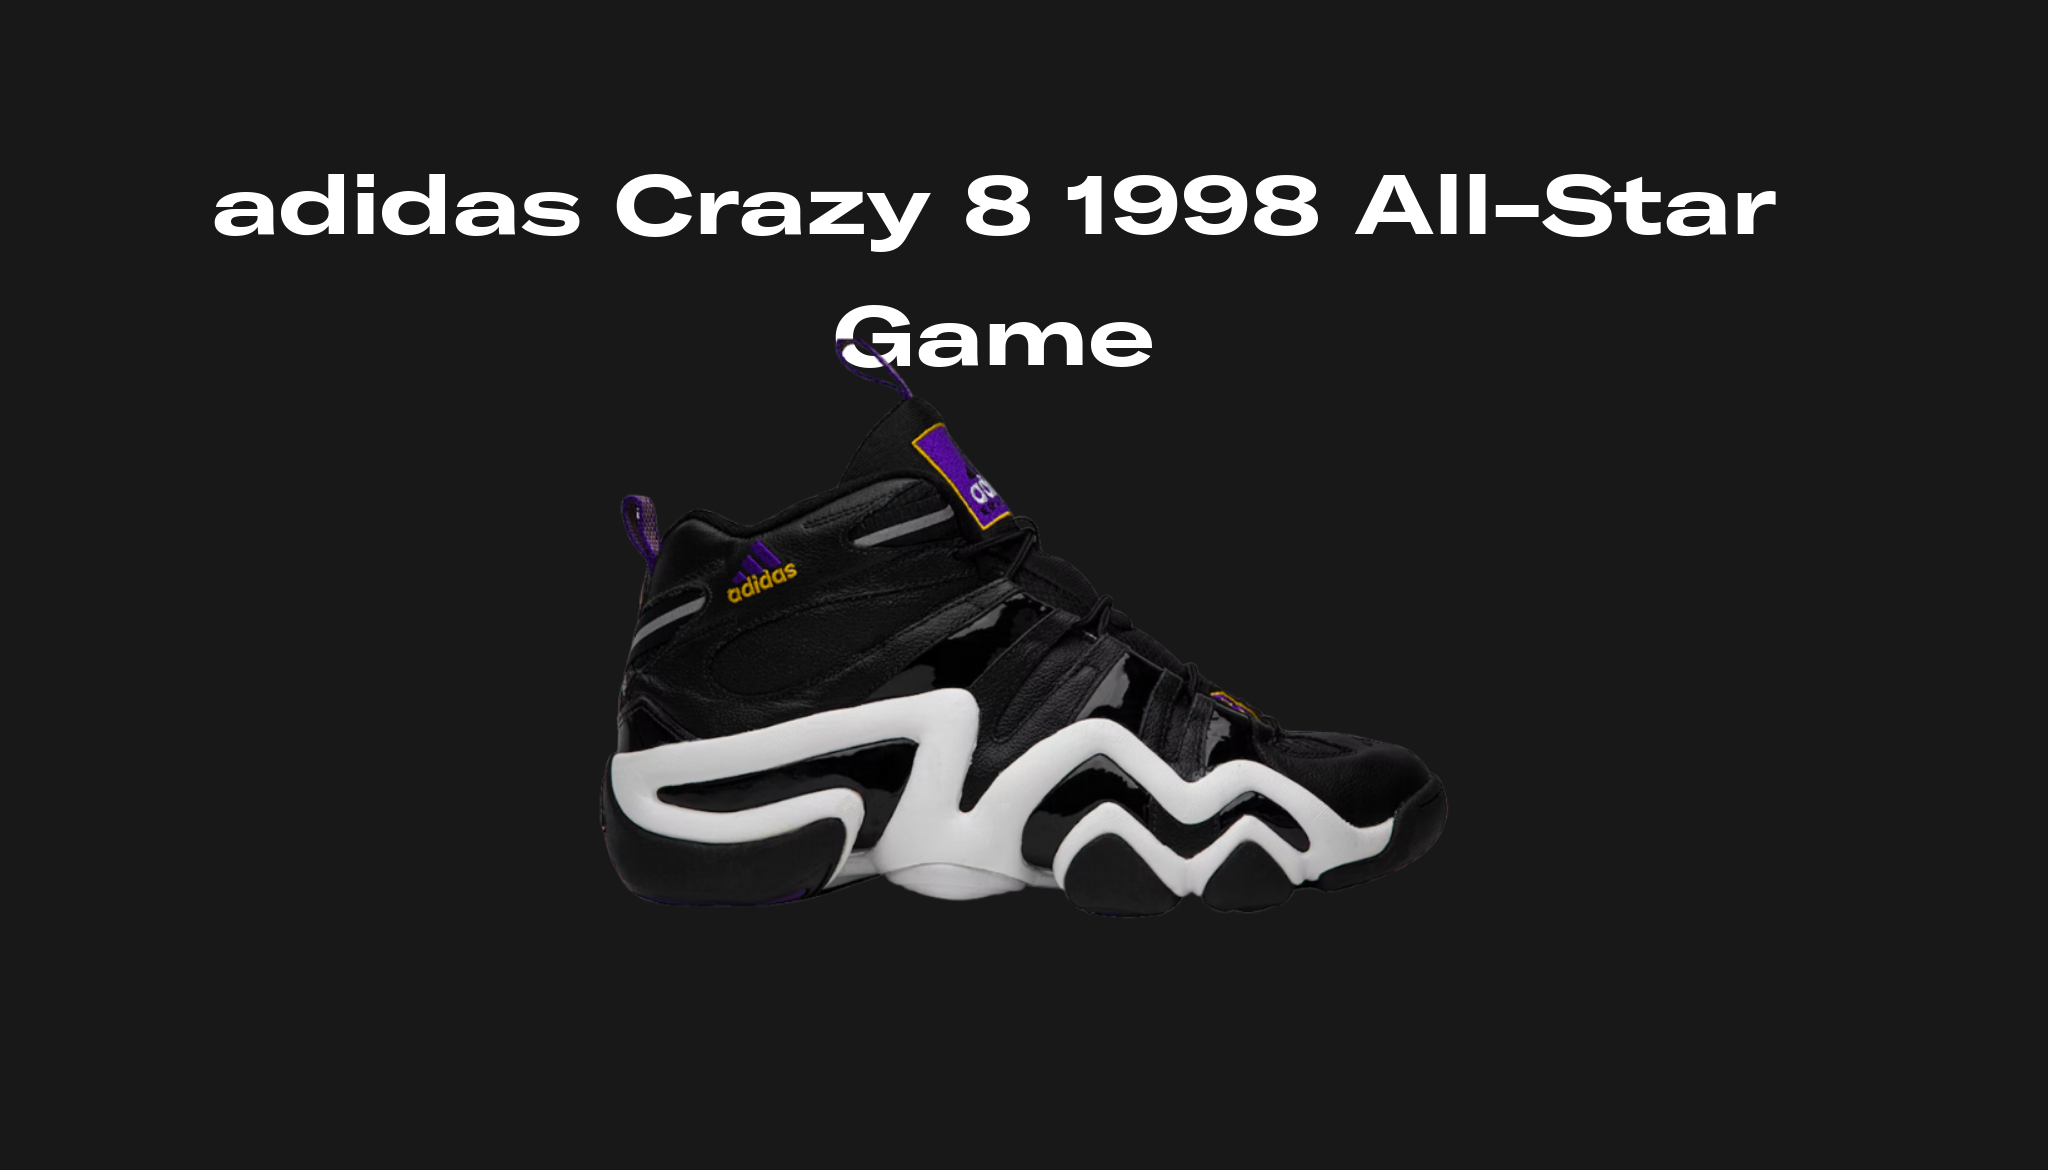 cayó estéreo Año adidas Crazy 8 1998 All-Star Game, Raffles and Release Date | Sole Retriever